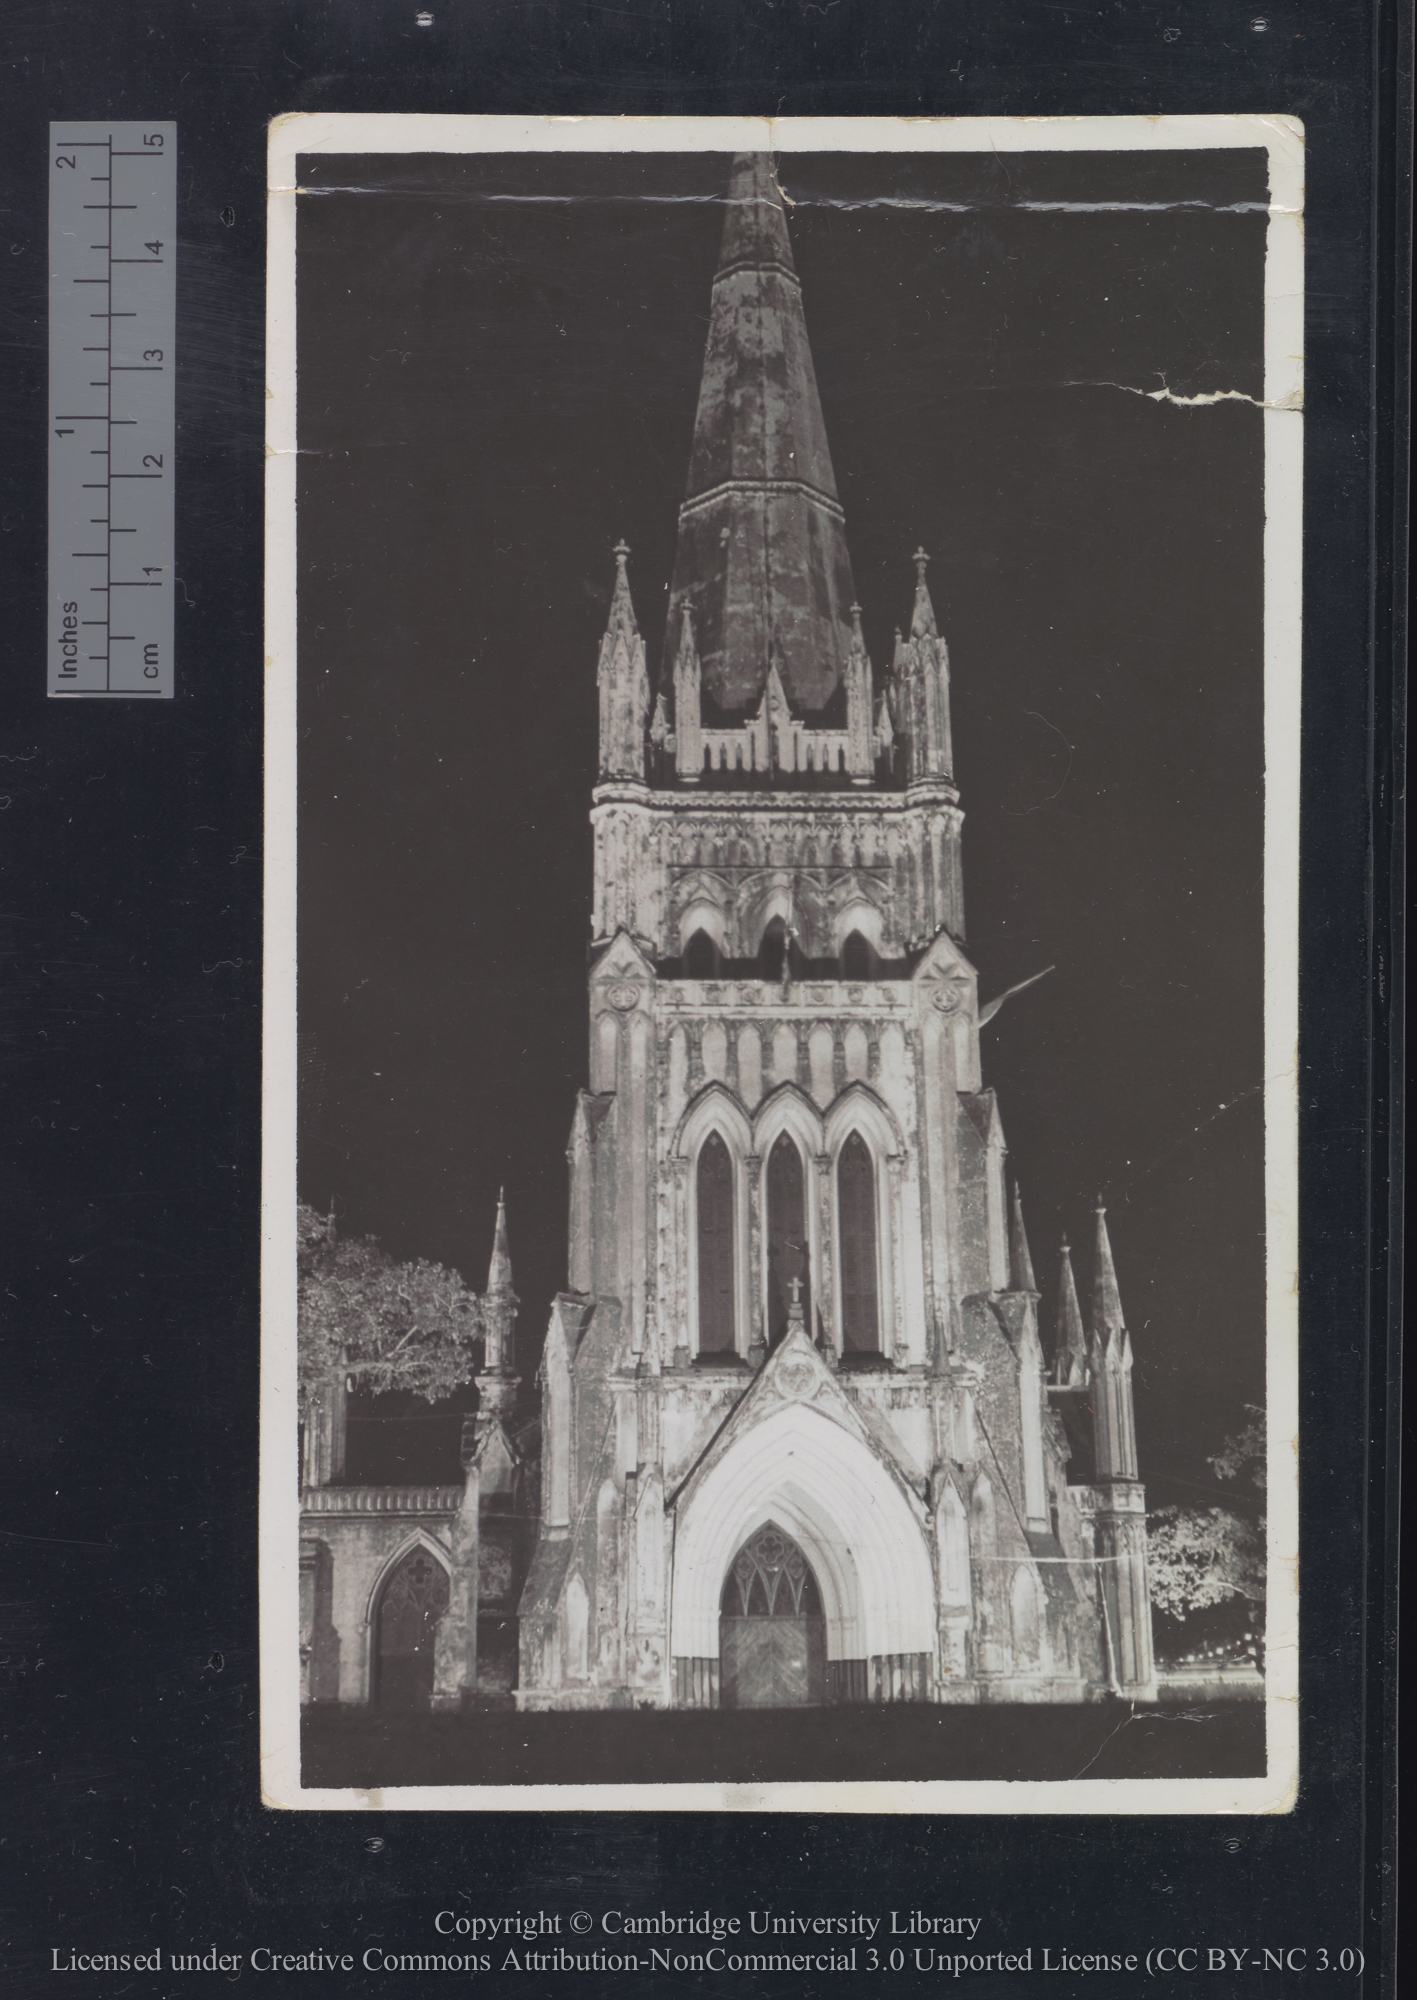 [Singapore Cathedral by moonlight], 1936